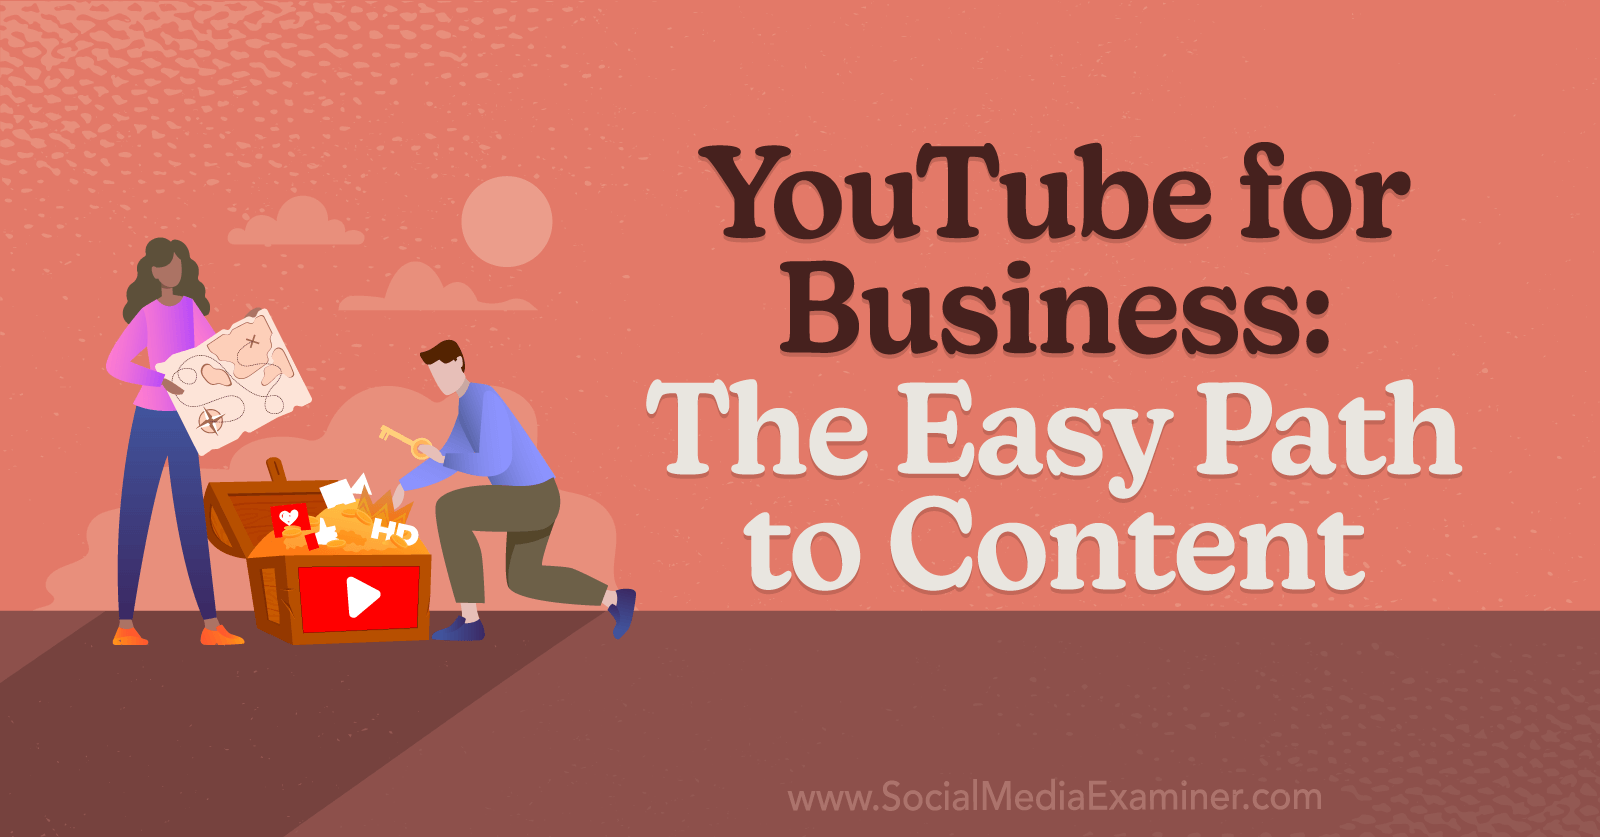 YouTube for Business: The Easy Path to Content-Social Media Examiner
